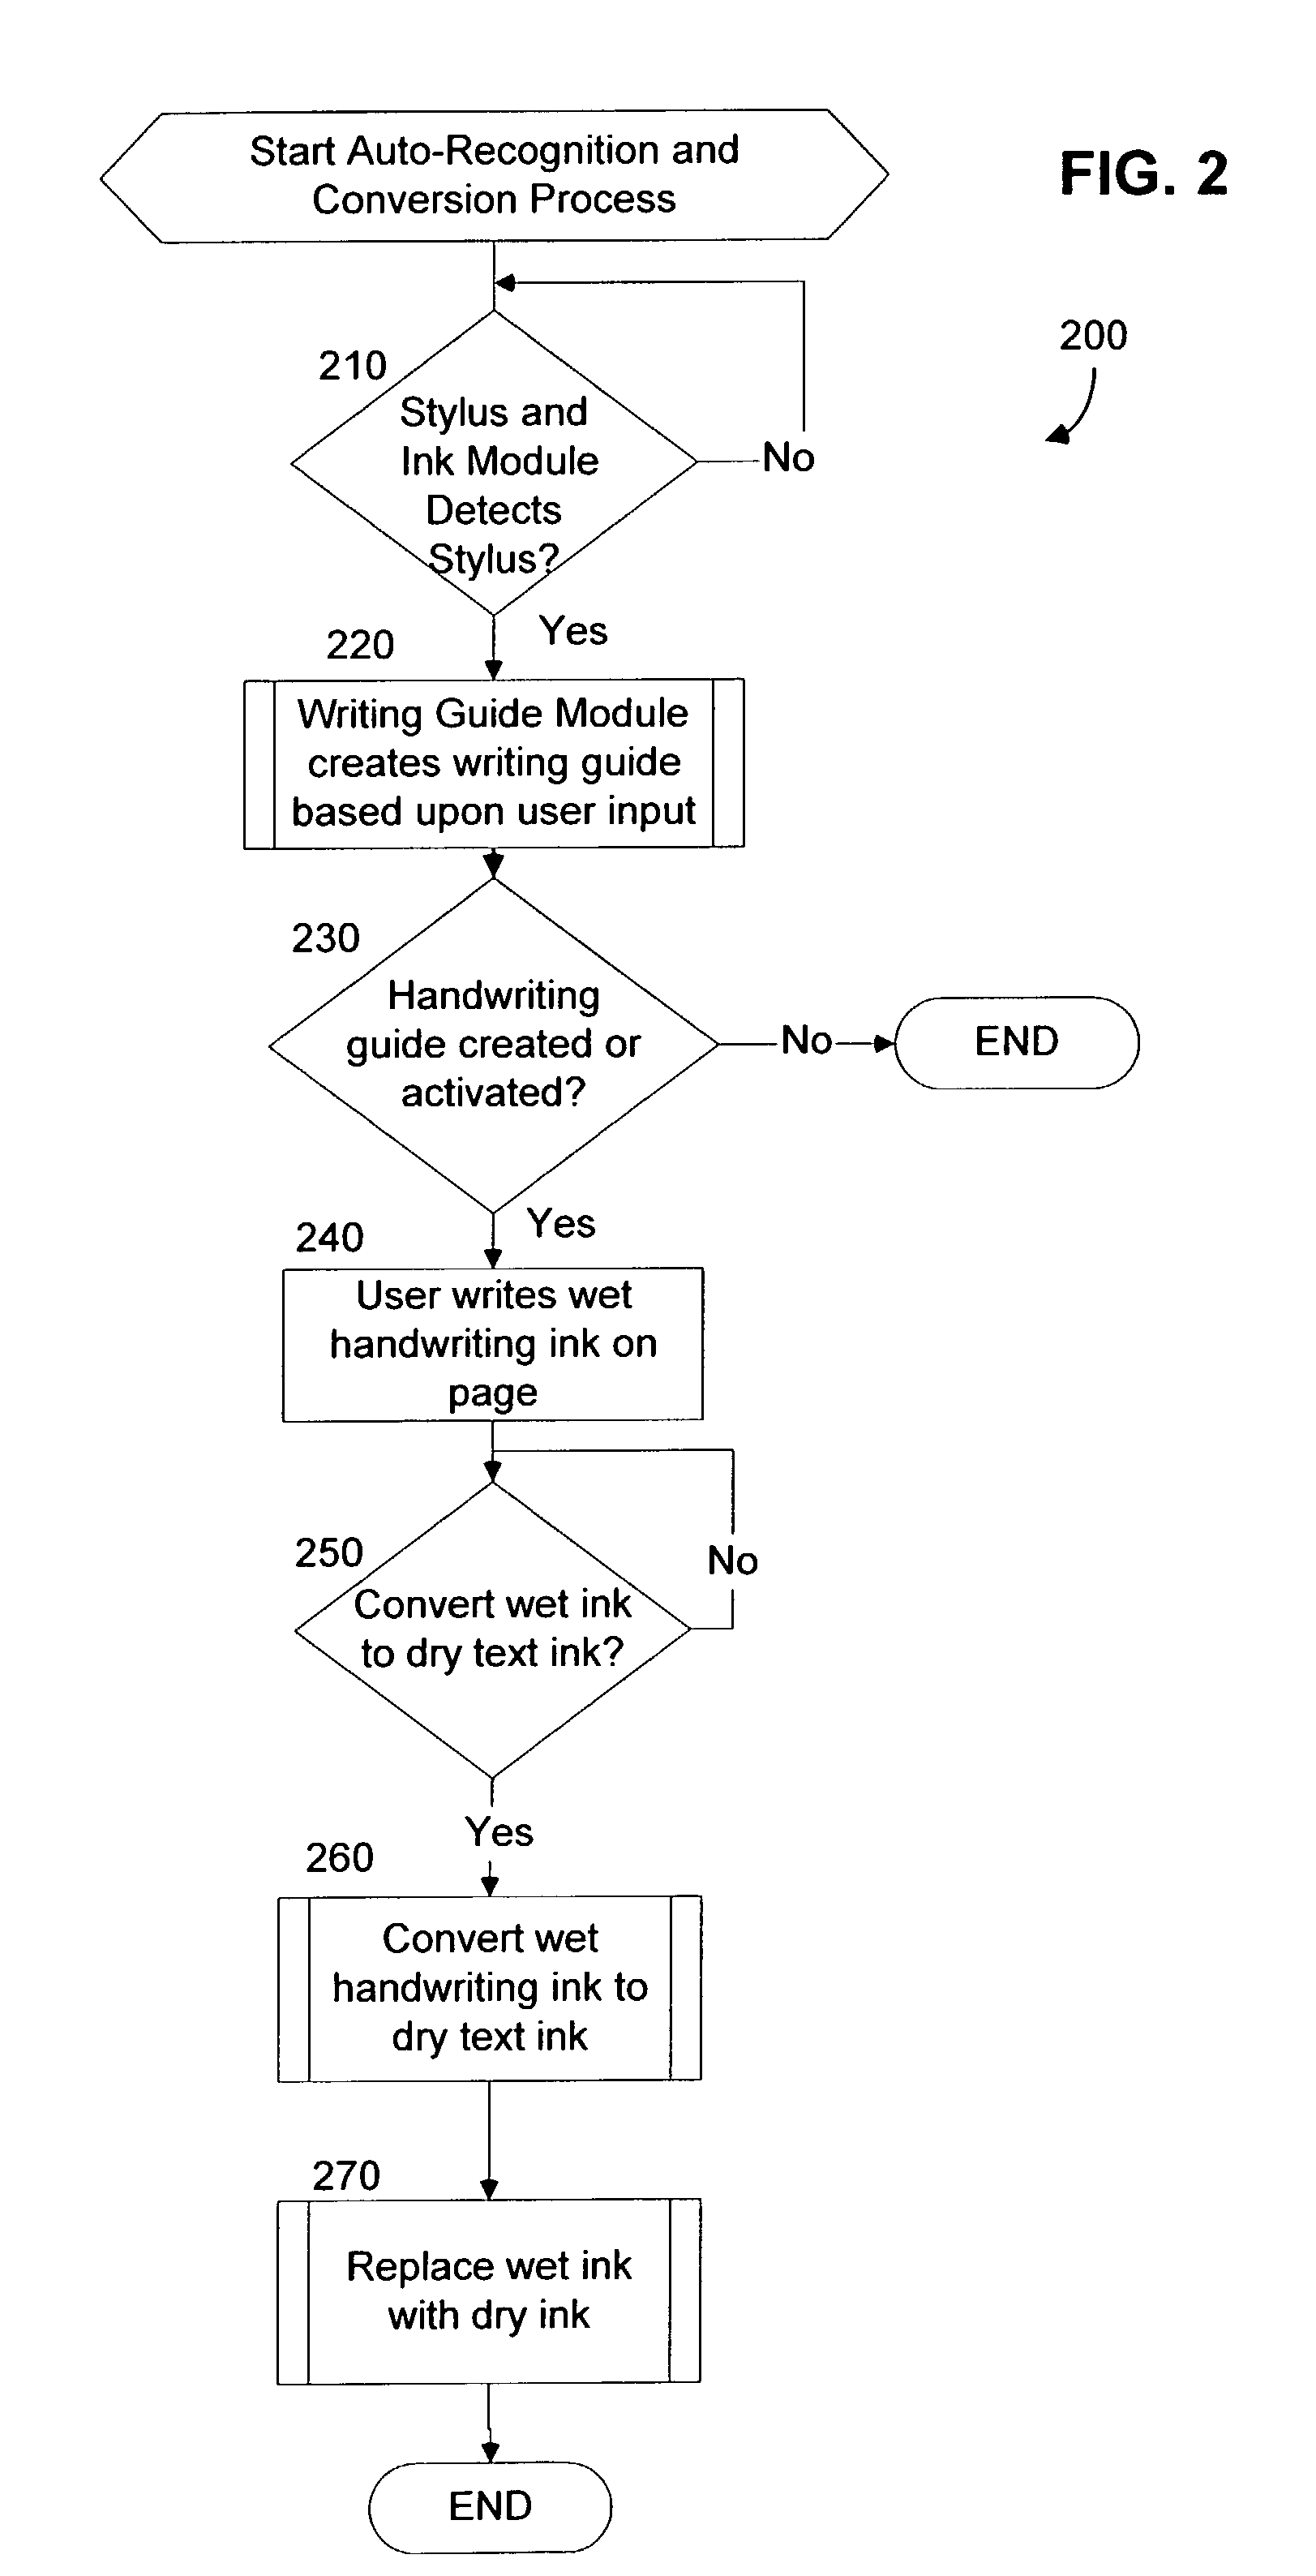 System and method for automatically recognizing electronic handwriting in an electronic document and converting to text